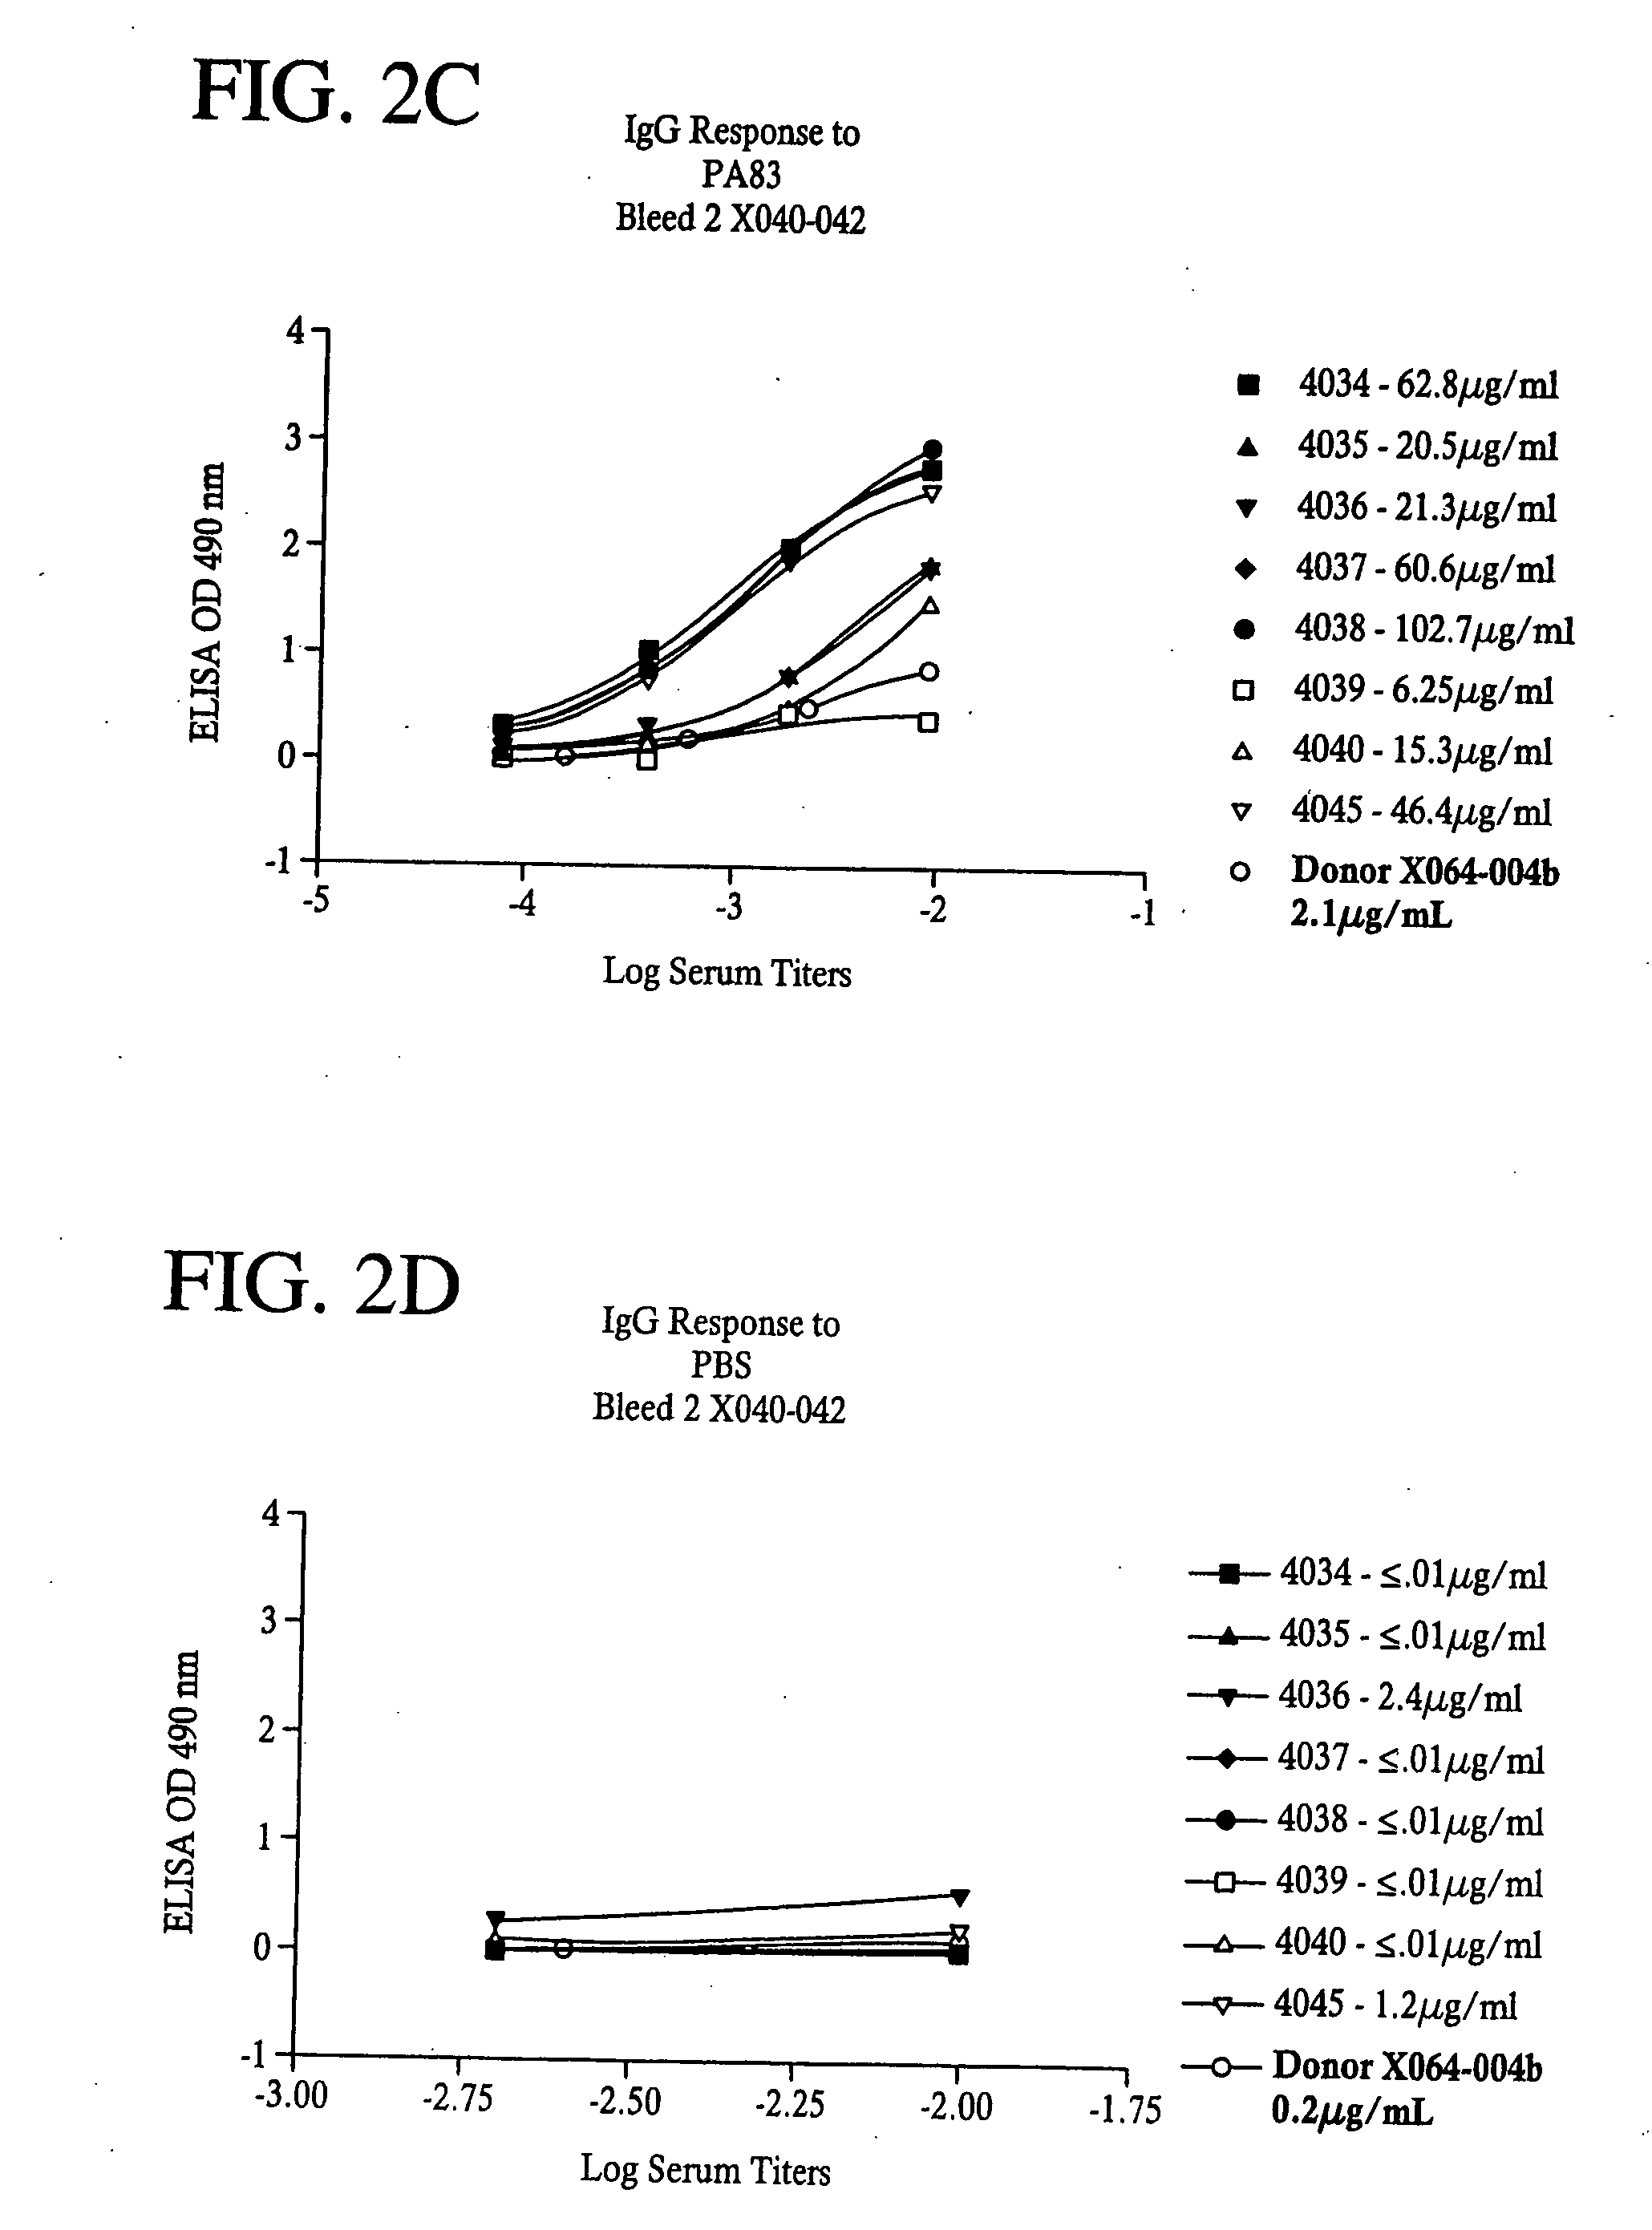 Antibodies against protective antigen and methods of use for passive immunization and treatment of anthrax